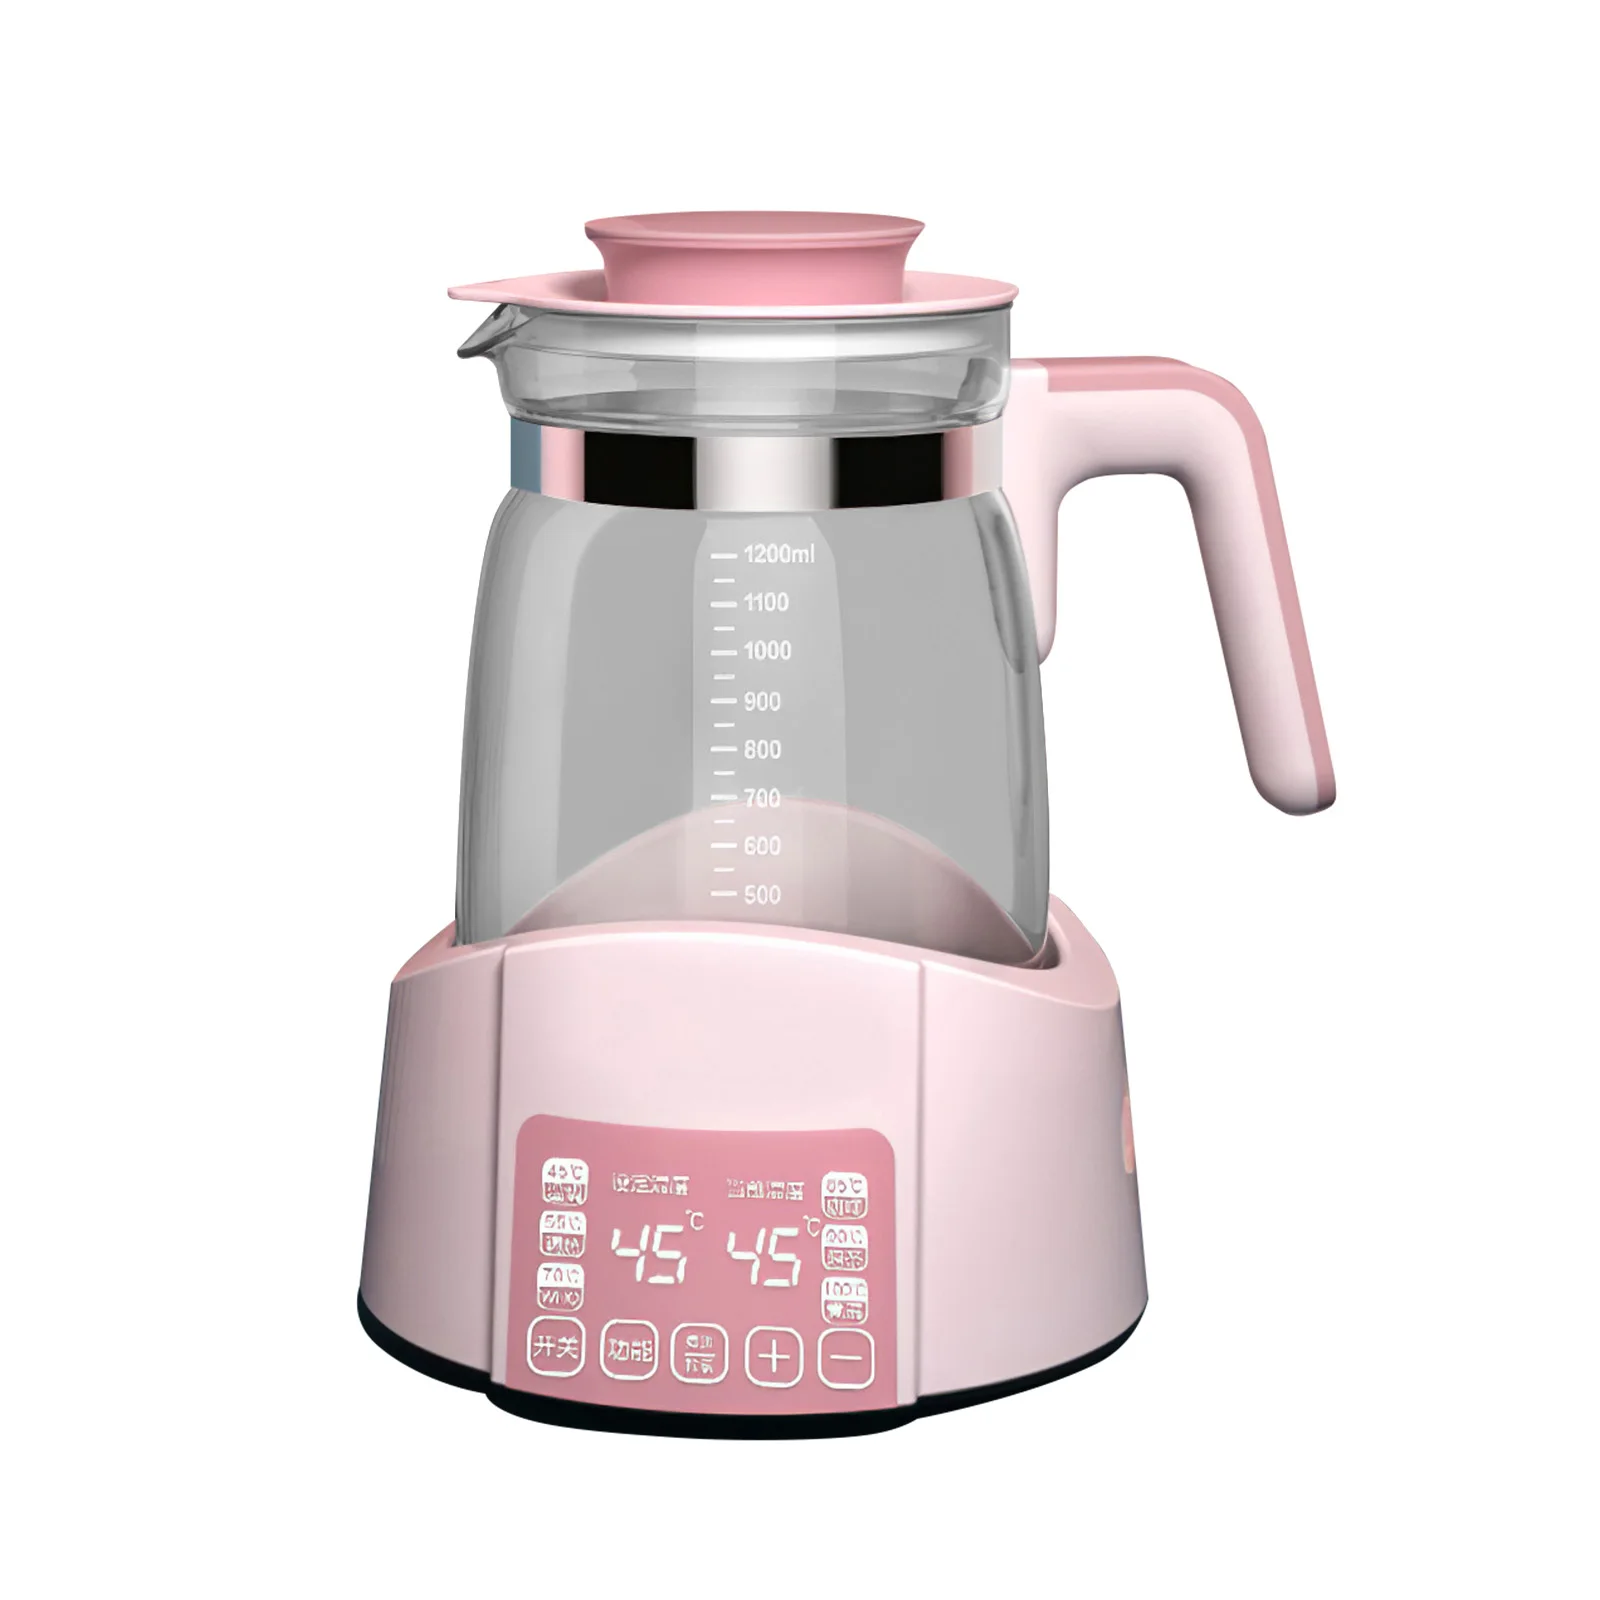 

24h Constant Temperature 220V Constant Heat Multi-Function Teakettle Electric Bottle Care Milk Water Warmer 1.2L Glass Kettle